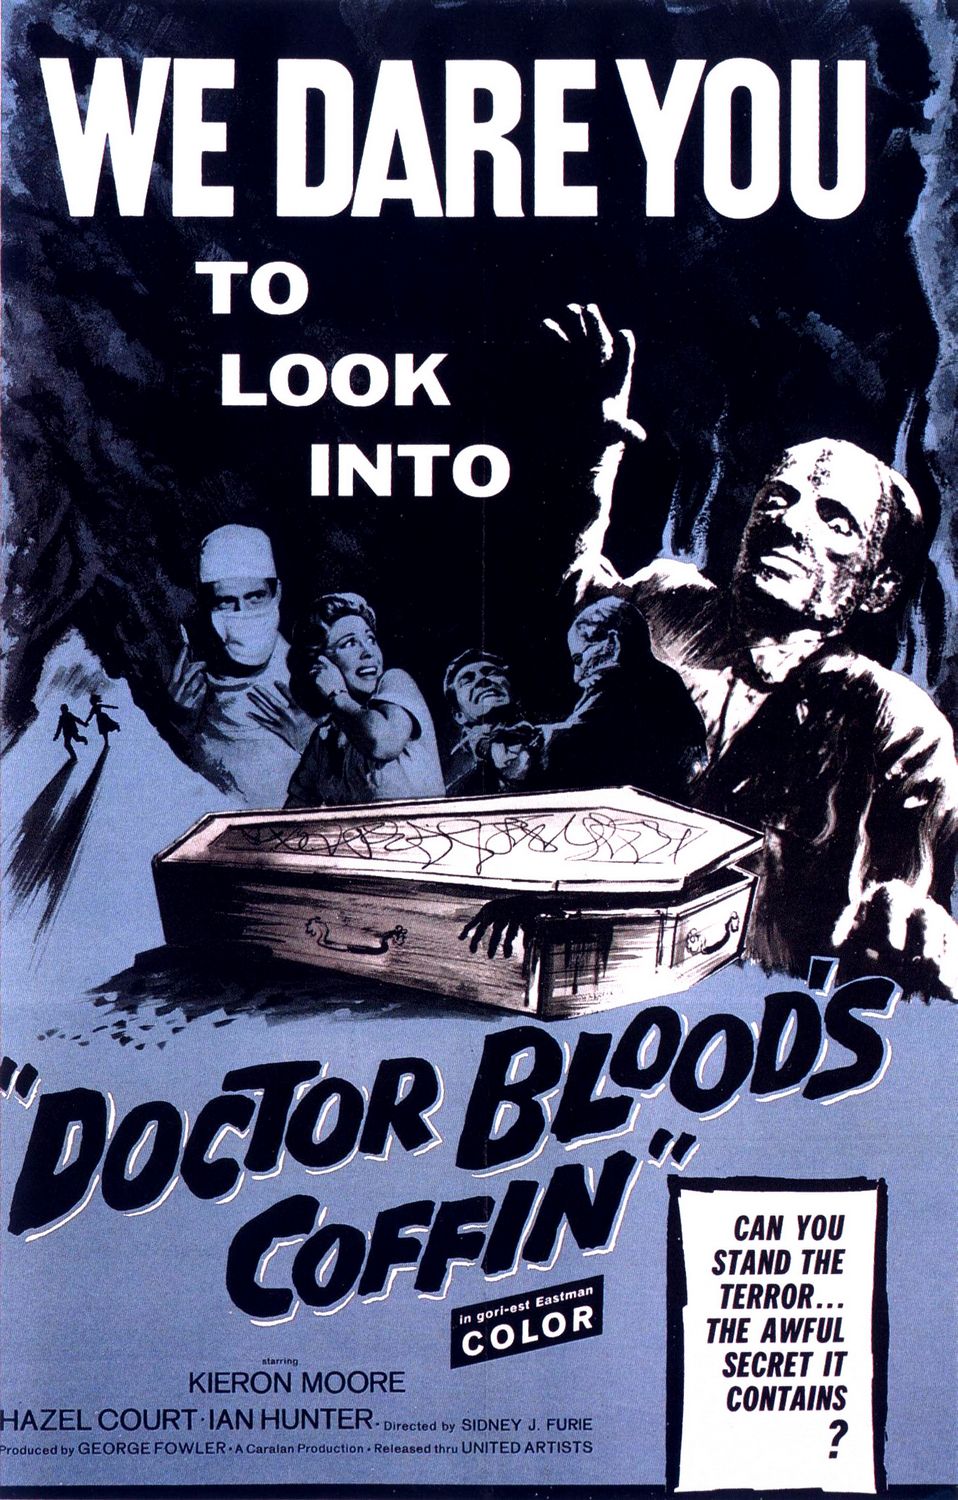 Extra Large Movie Poster Image for Doctor Blood's Coffin 